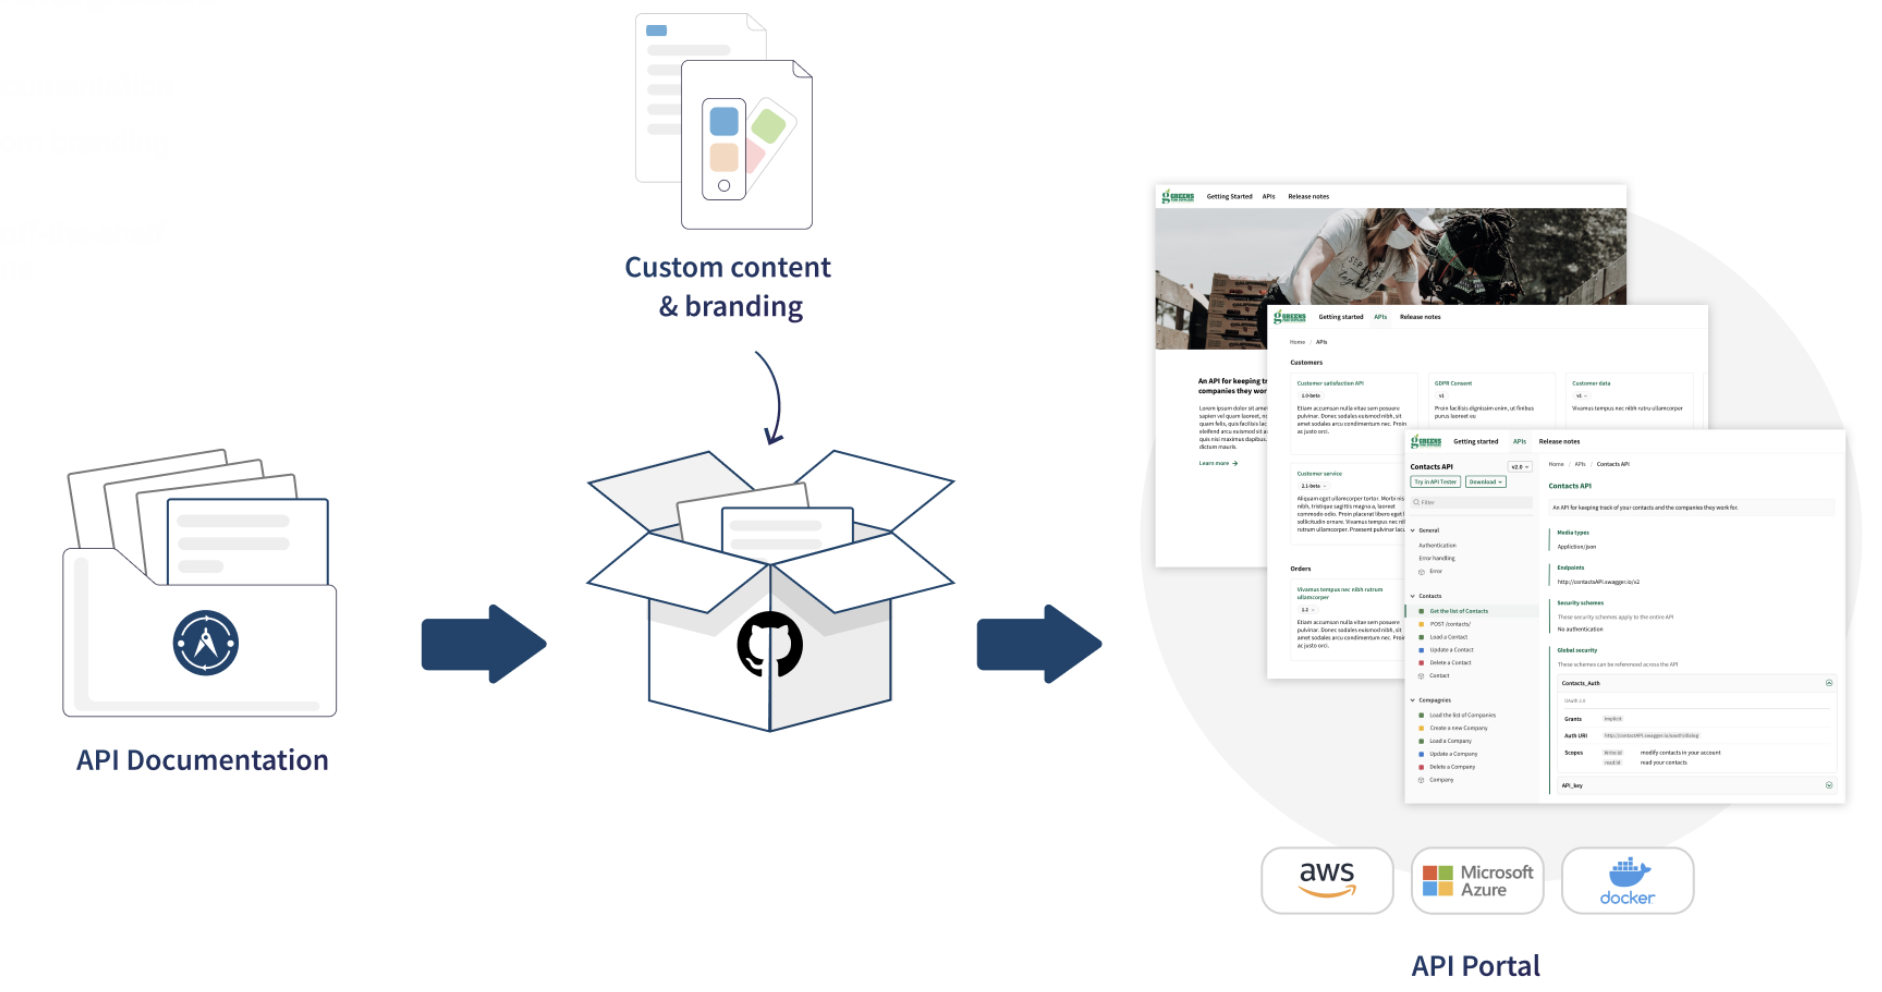 An API documentation generated from Talend Cloud API Designer can be packaged together with custom content and branding assets in GitHub and then published as a custom API portal.